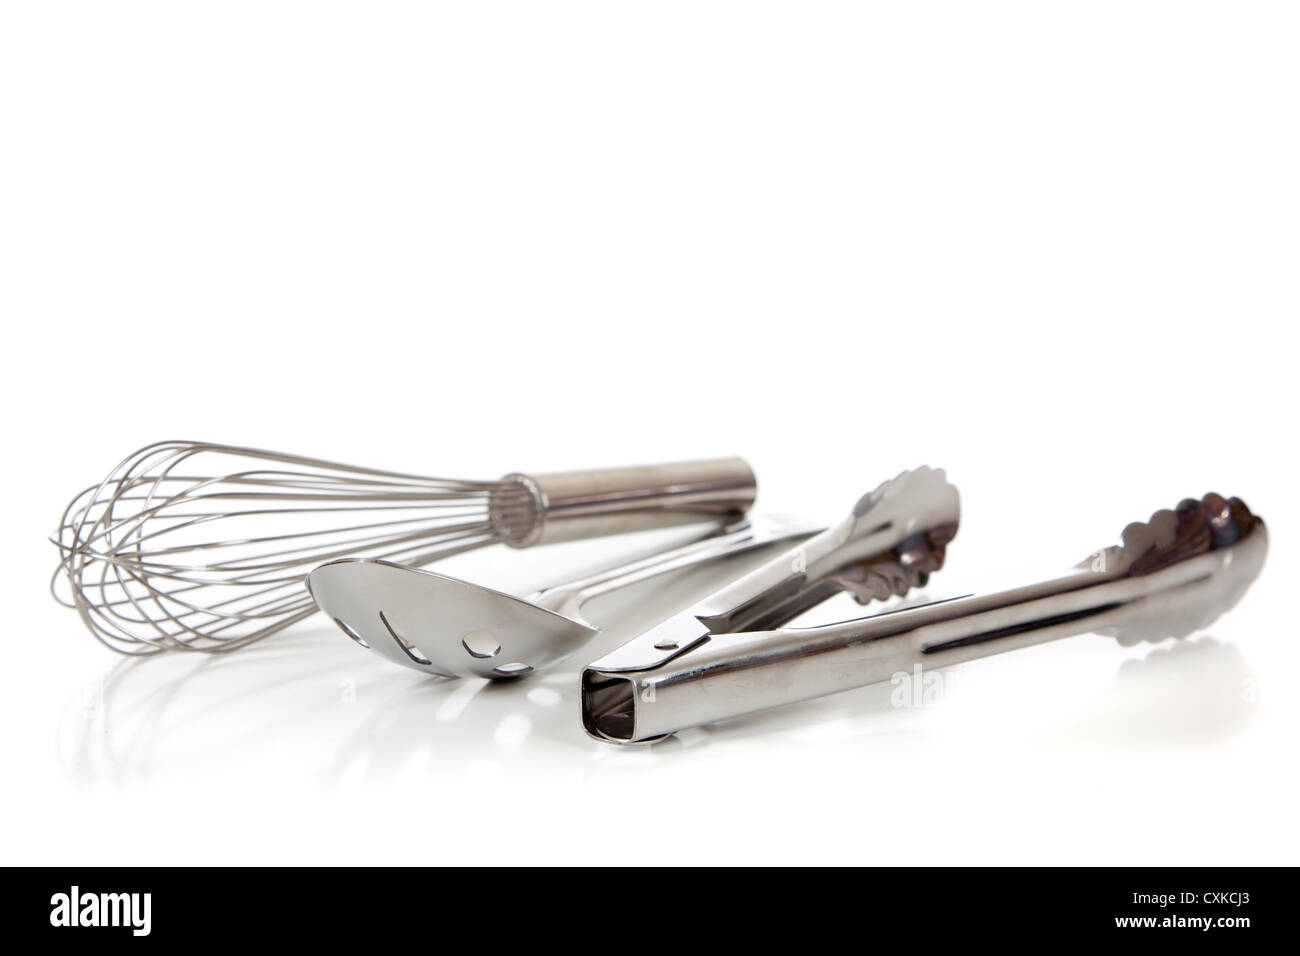 https://c8.alamy.com/comp/CXKCJ3/silver-kitchen-utensils-including-whisk-tong-and-spoon-on-a-white-CXKCJ3.jpg